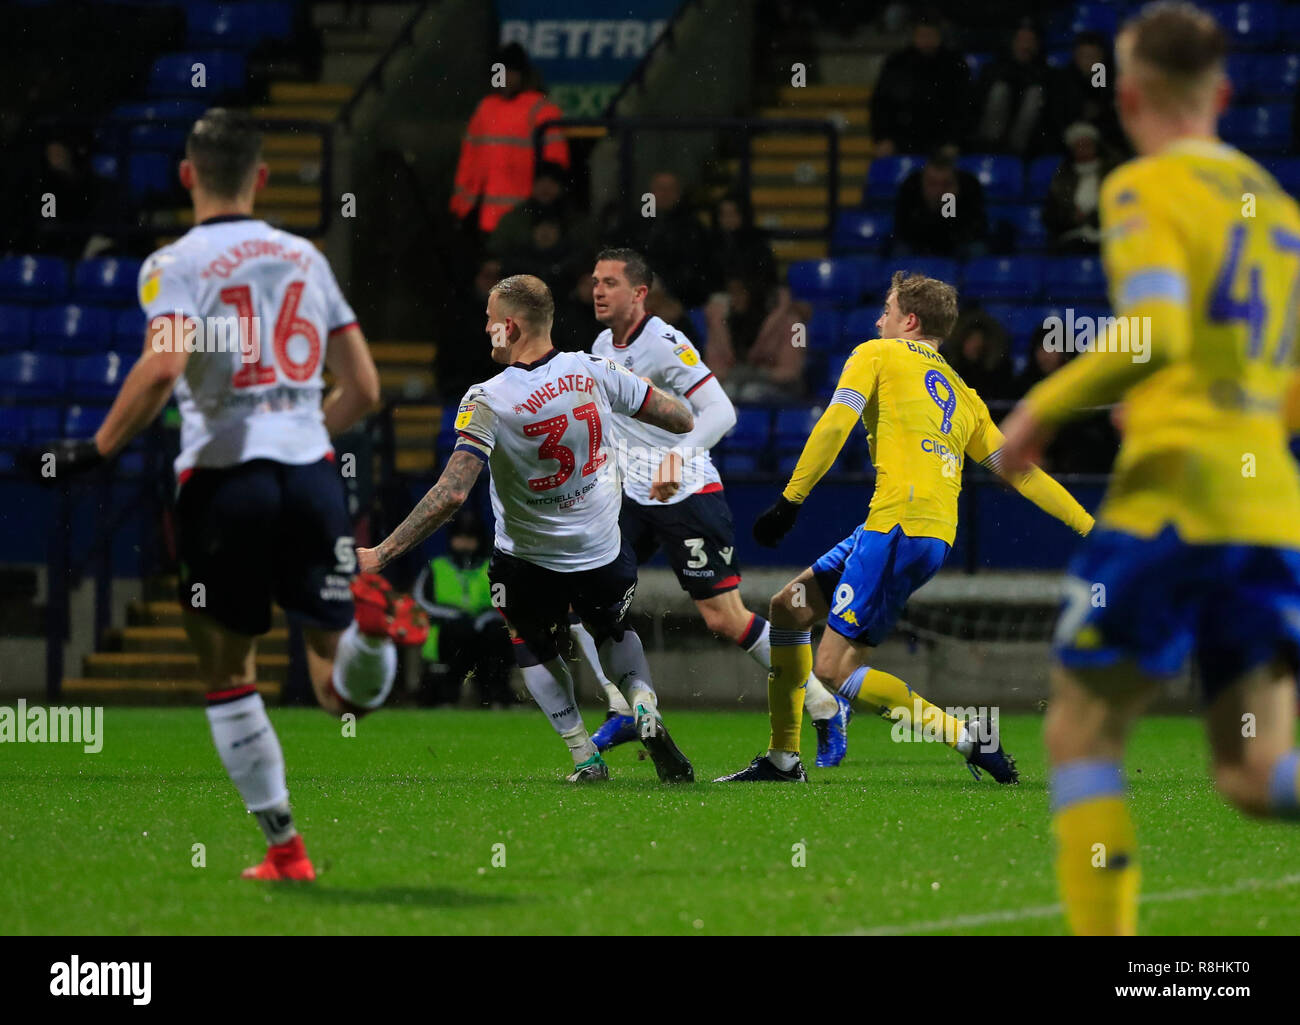 Bolton, UK. 15th December 2018. Sky Bet Championship, Bolton vs Leeds United ; Patrick Bamford of Leeds United scores the opening goal of the game 0-1 to Leeds    Credit: Conor Molloy/News Images  English Football League images are subject to DataCo Licence Credit: News Images /Alamy Live News Stock Photo